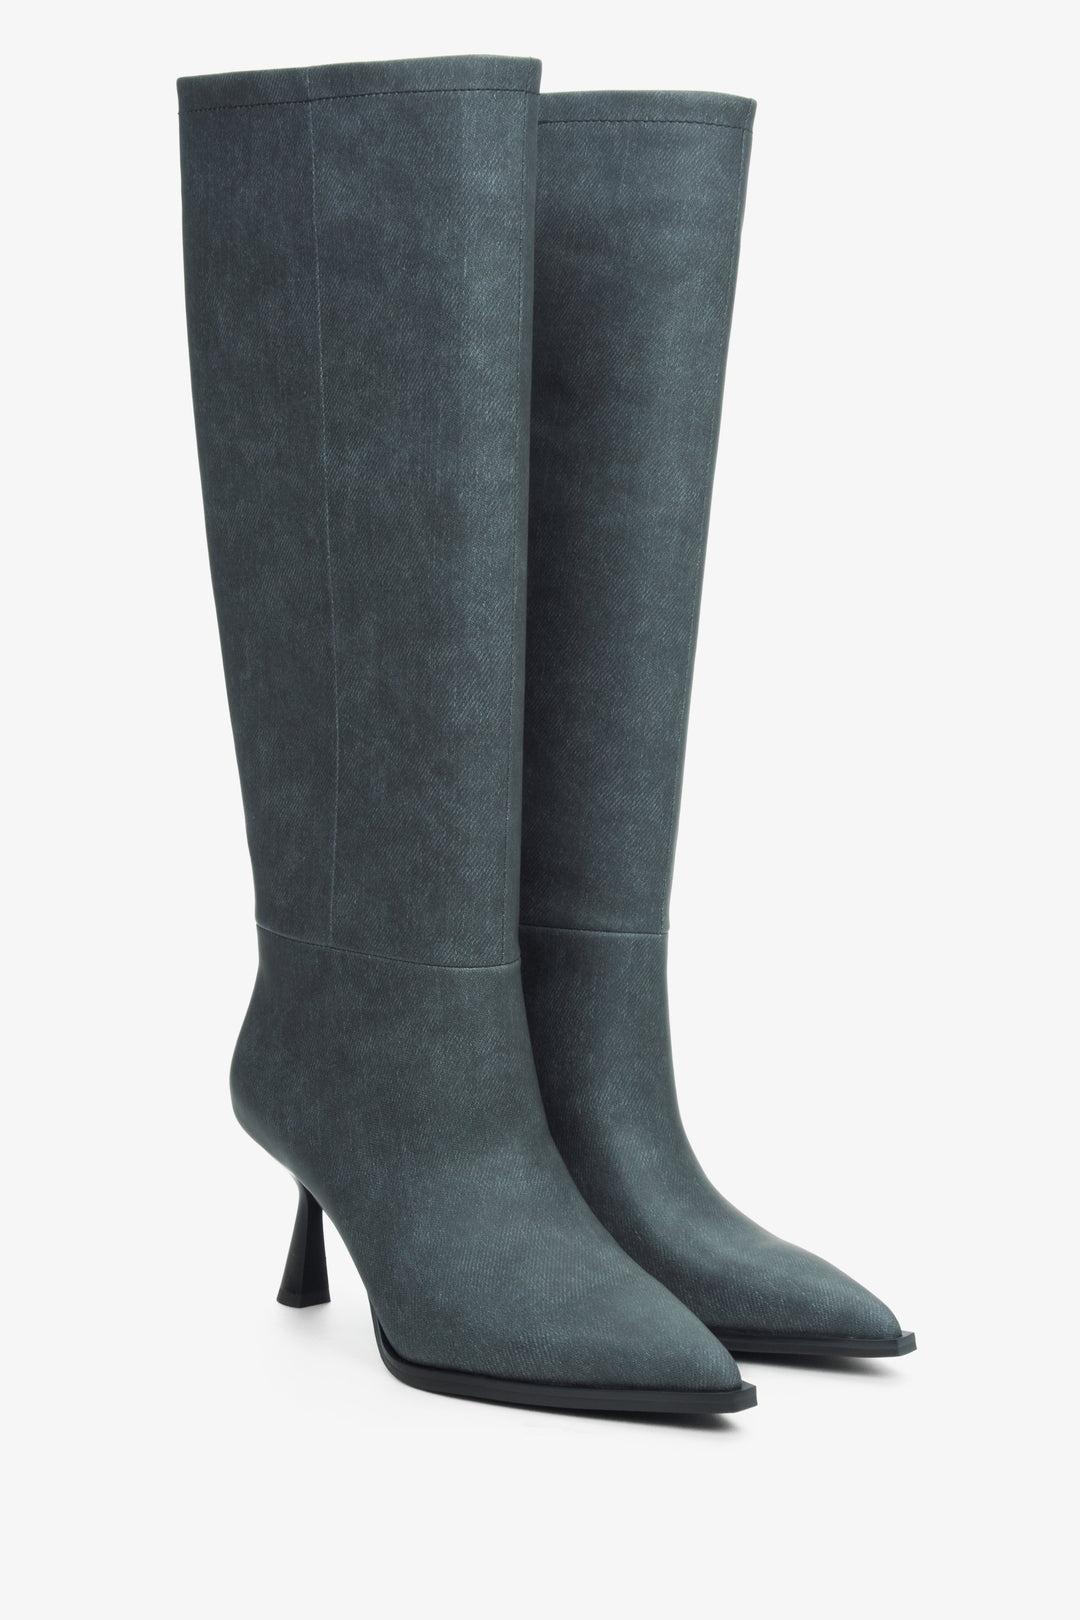 Knee-high grey women's boots with a wide shaft by Estro.